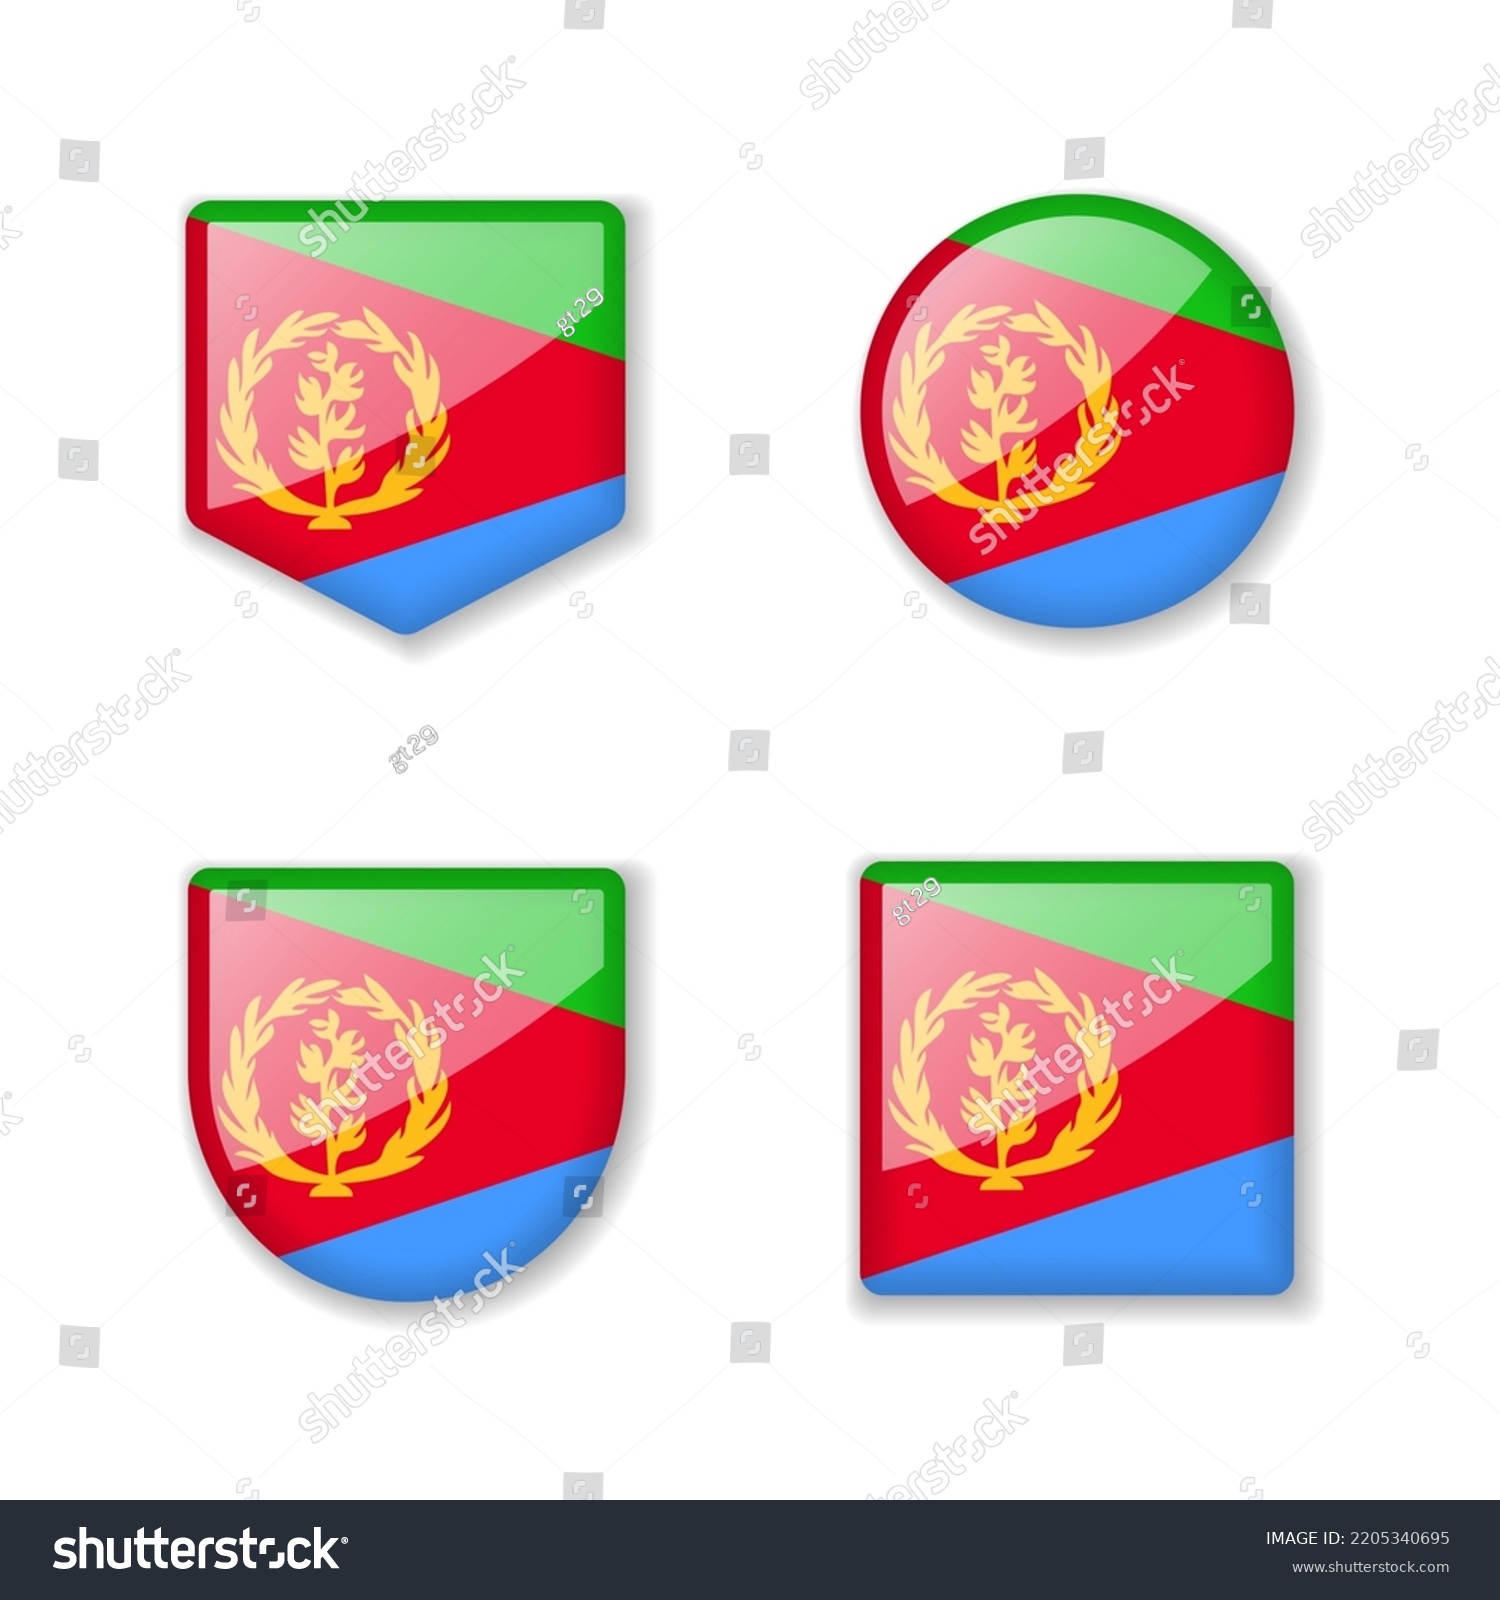 Flags Of Eritrea Glossy Collection Set Of Royalty Free Stock Vector 2205340695 